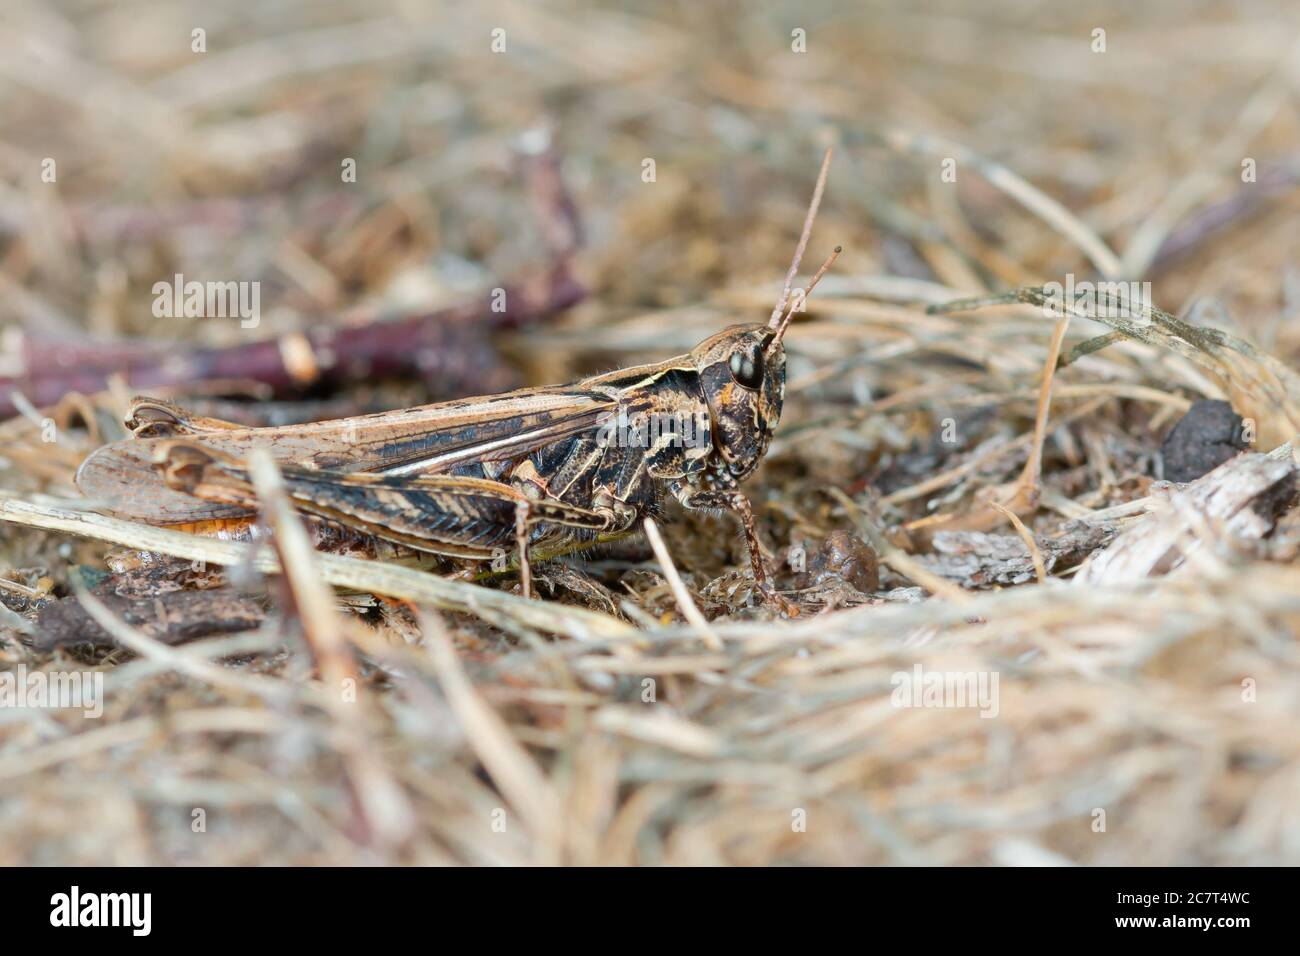 The little cricket demonstrates its impressive camoflage amongst the dried grass Stock Photo